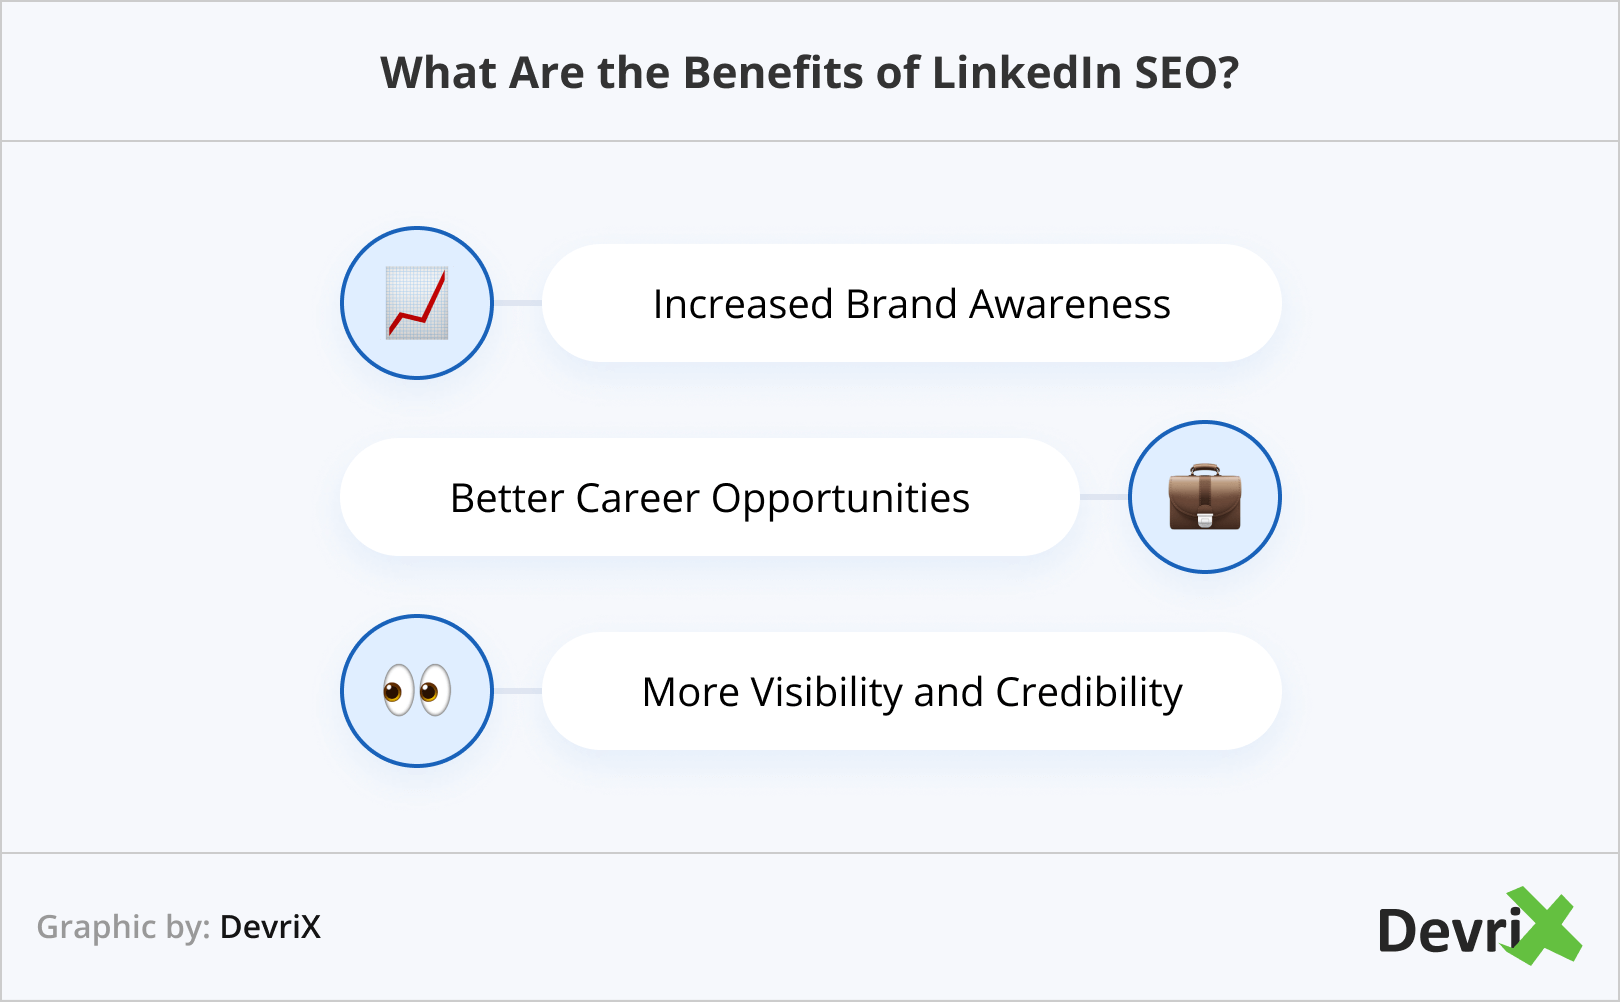 What Are the Benefits of LinkedIn SEO